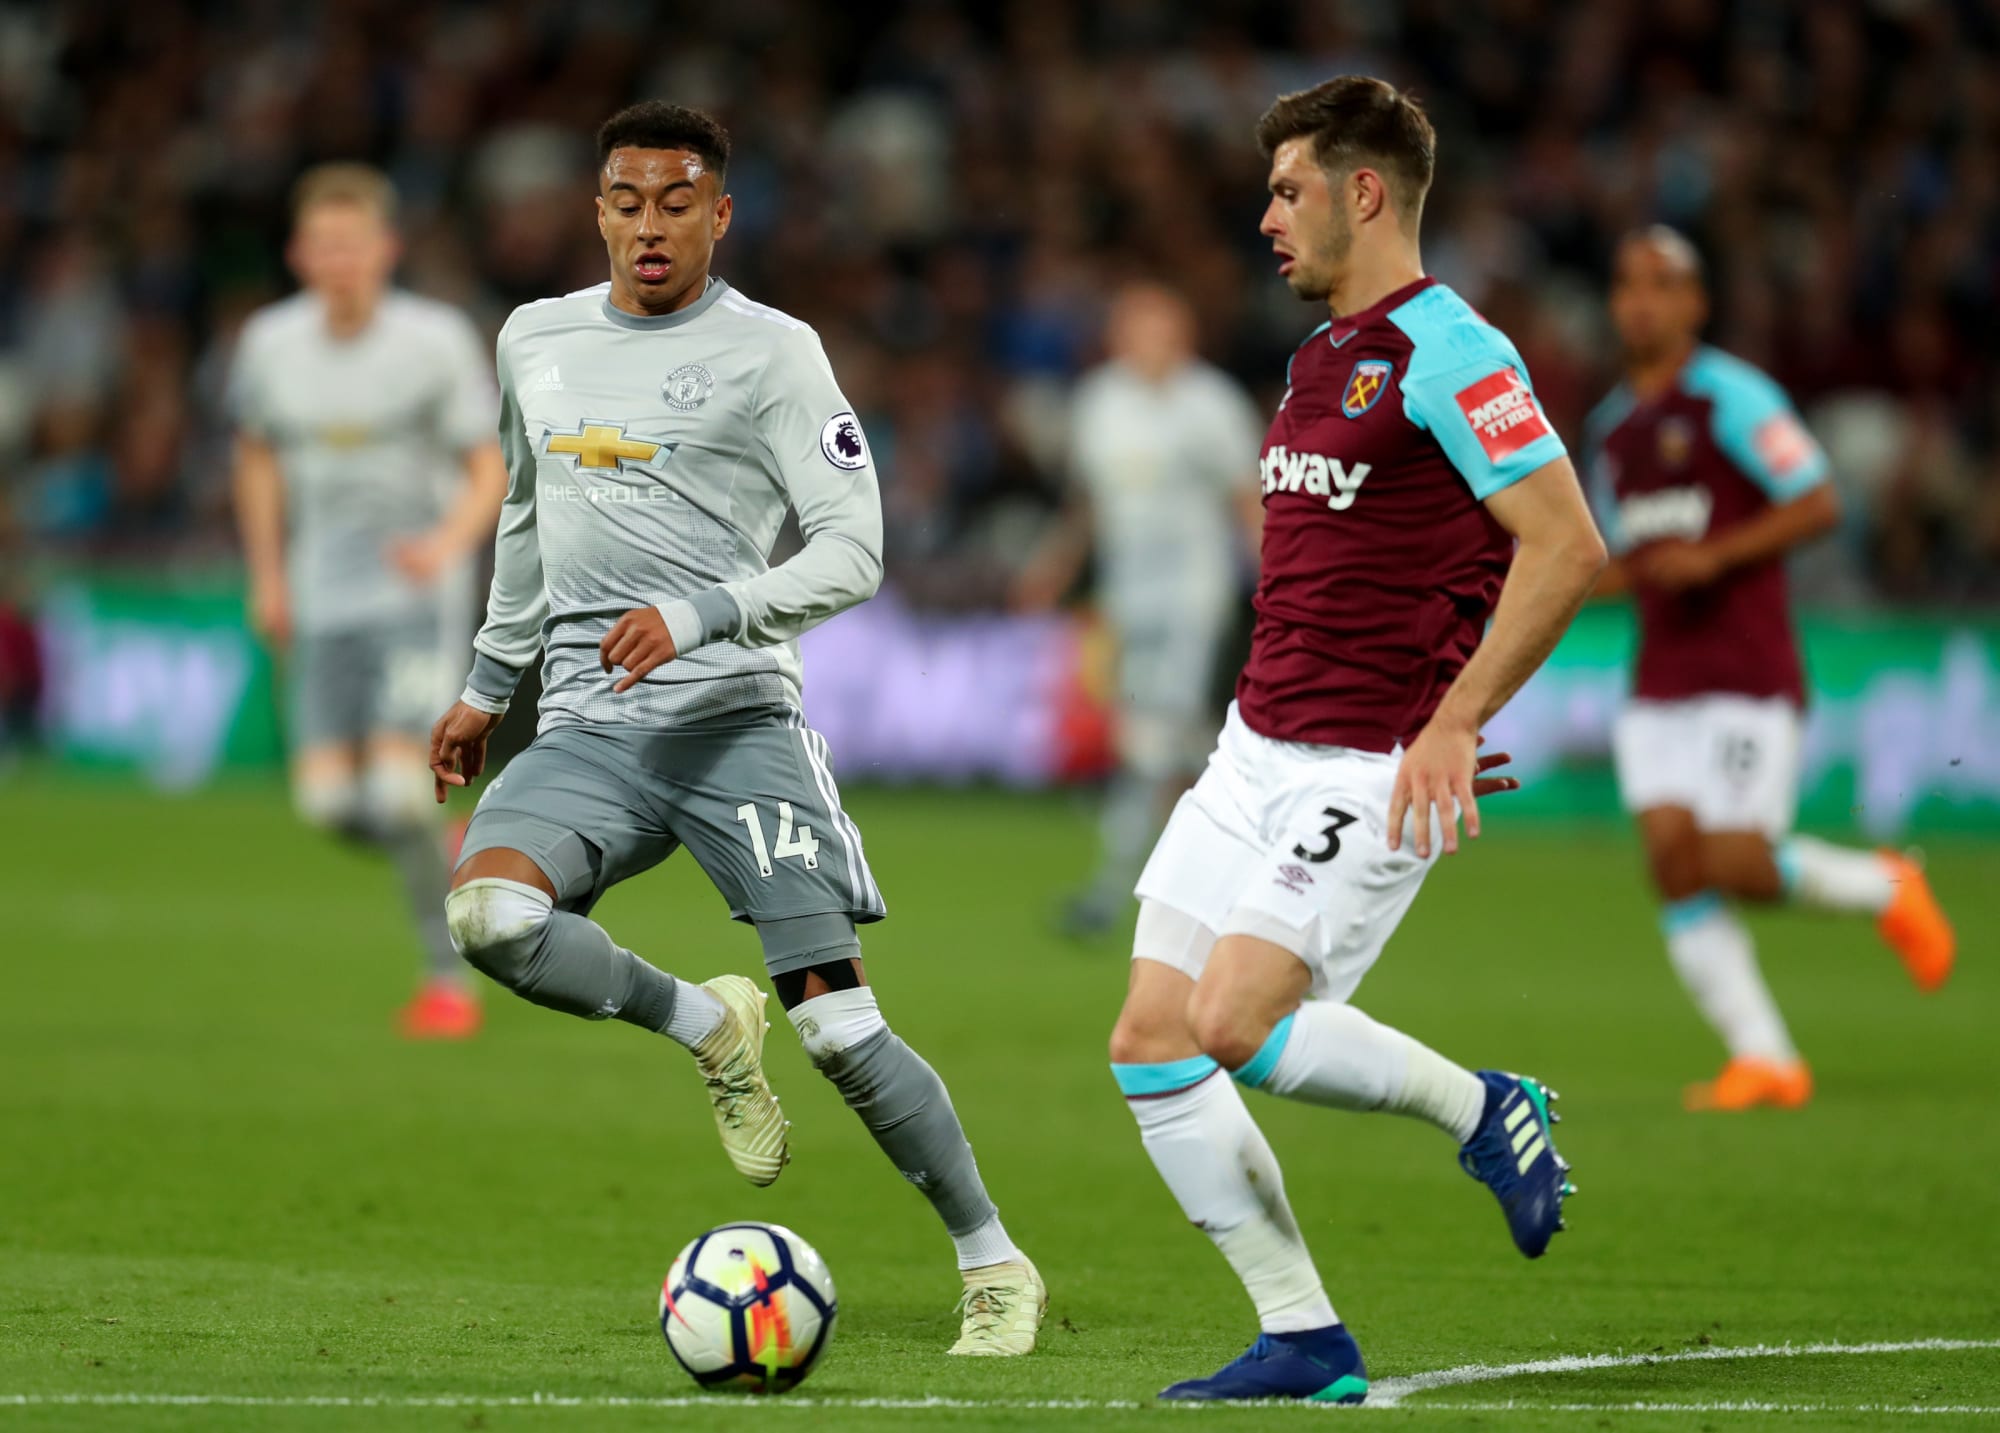 Three BOLD Predictions for Jesse Lingard at West Ham